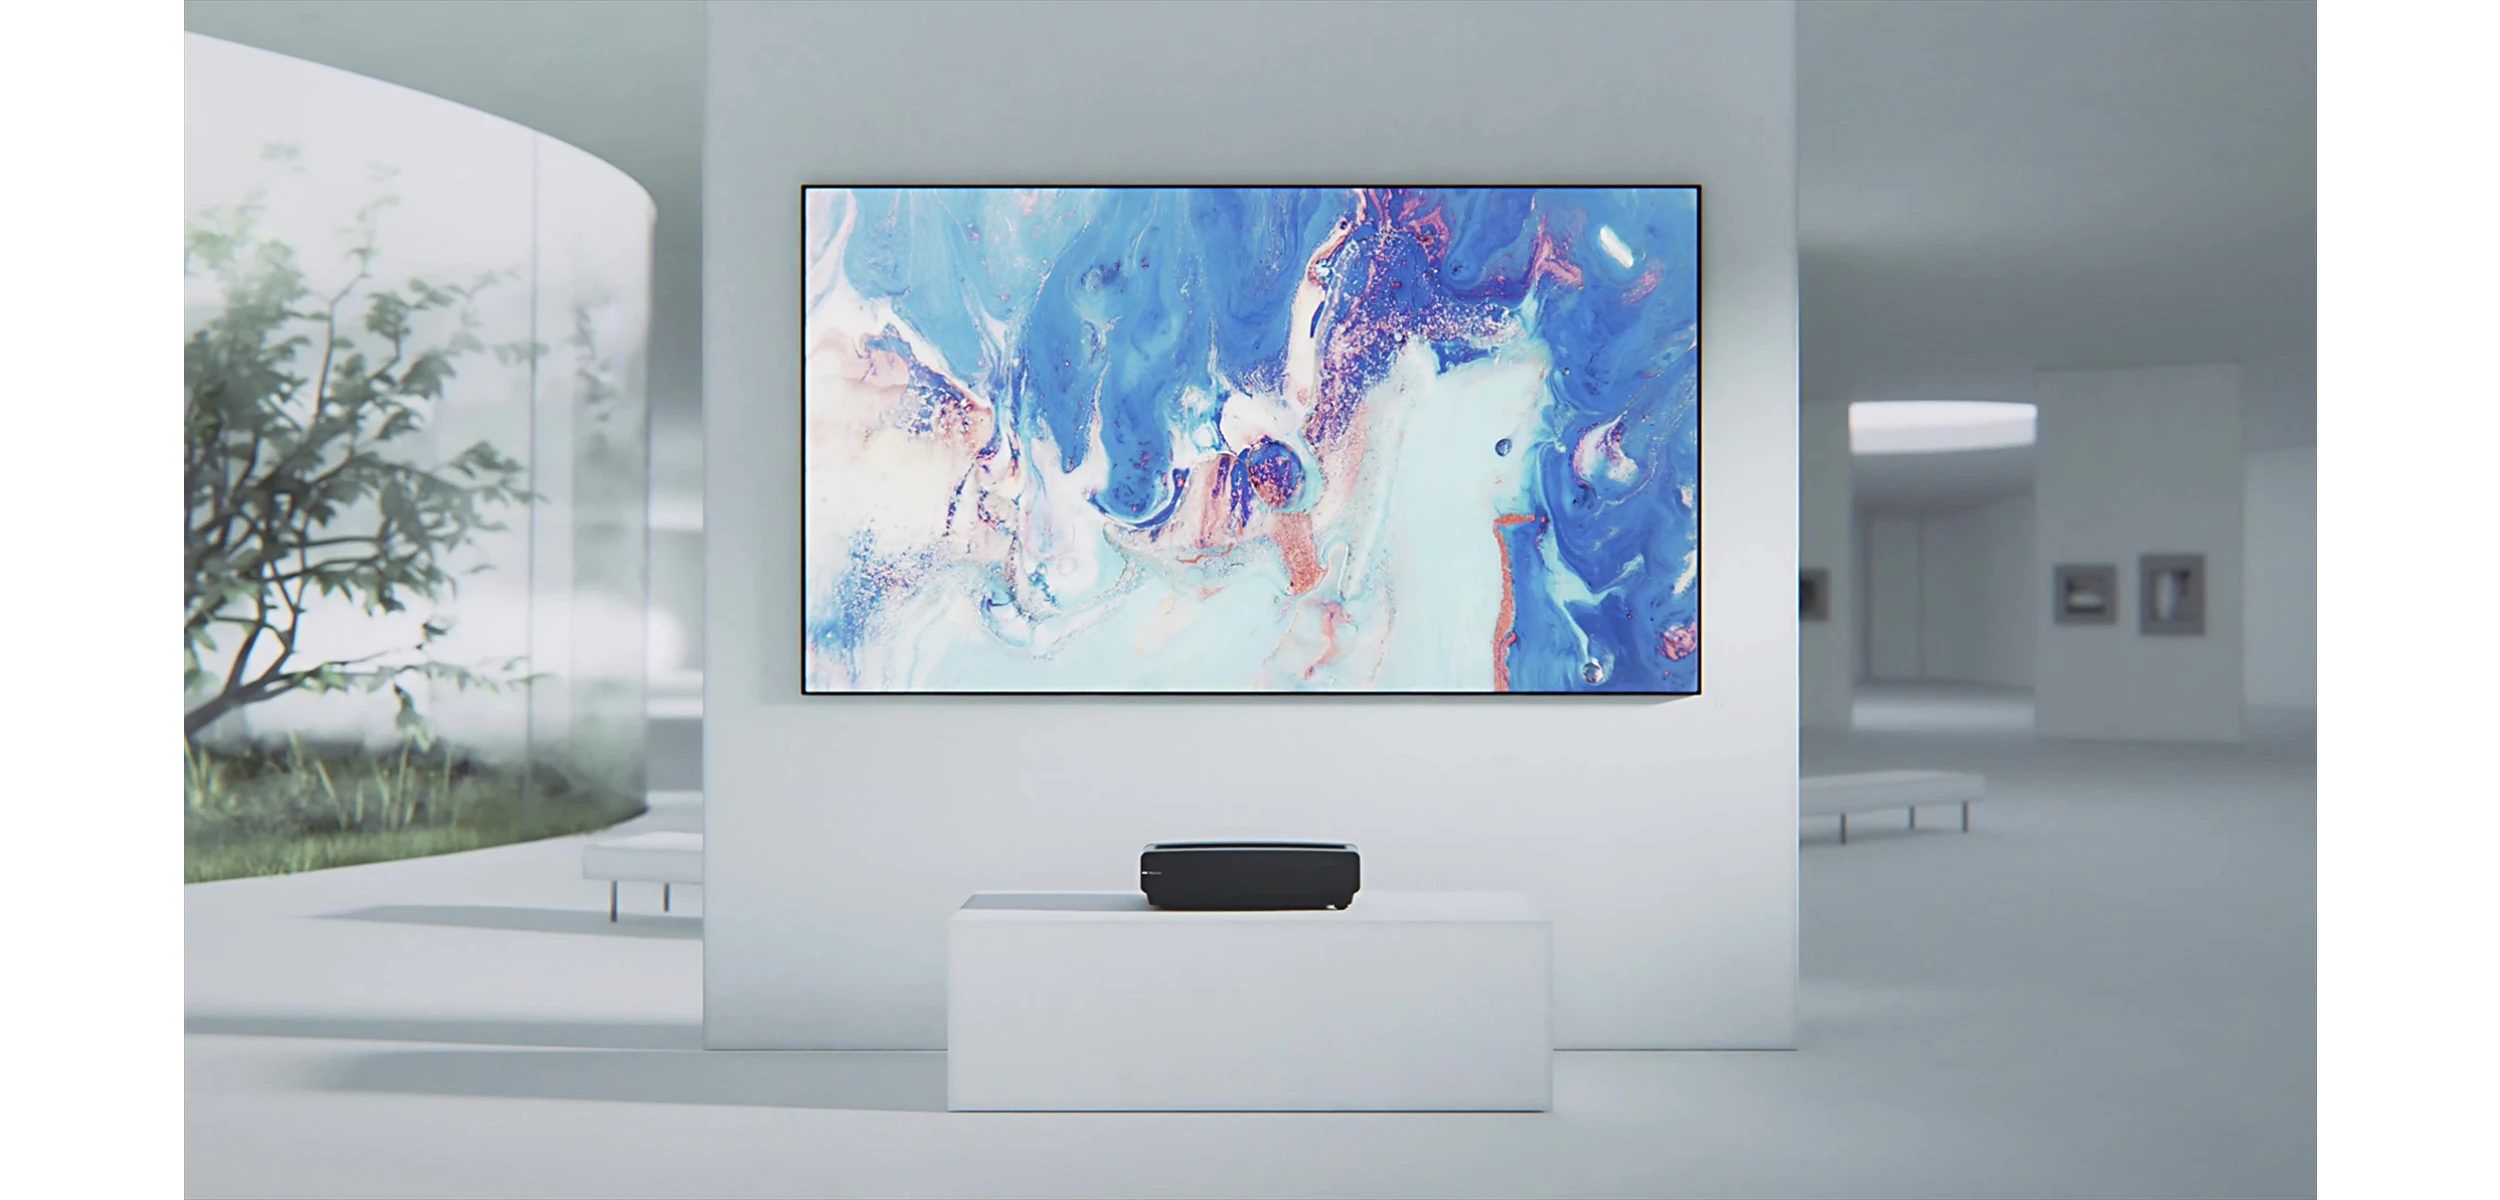 100-inch TVs - The future is now